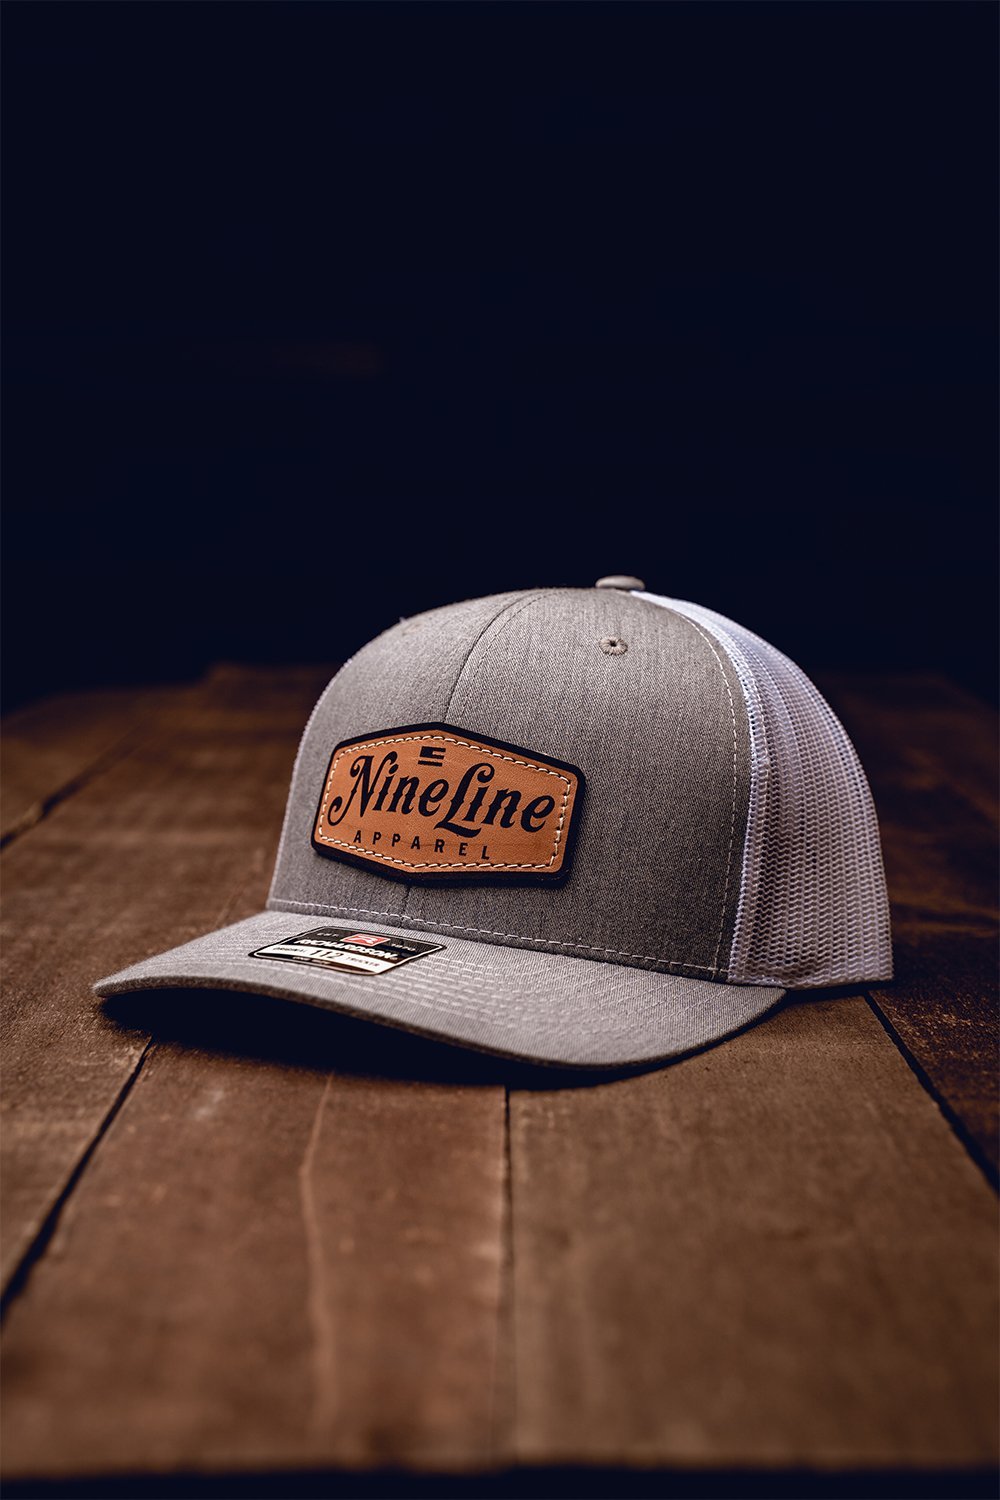 Classic Leather Patch Hat by Richardson [ON SALE] - Nine Line Apparel